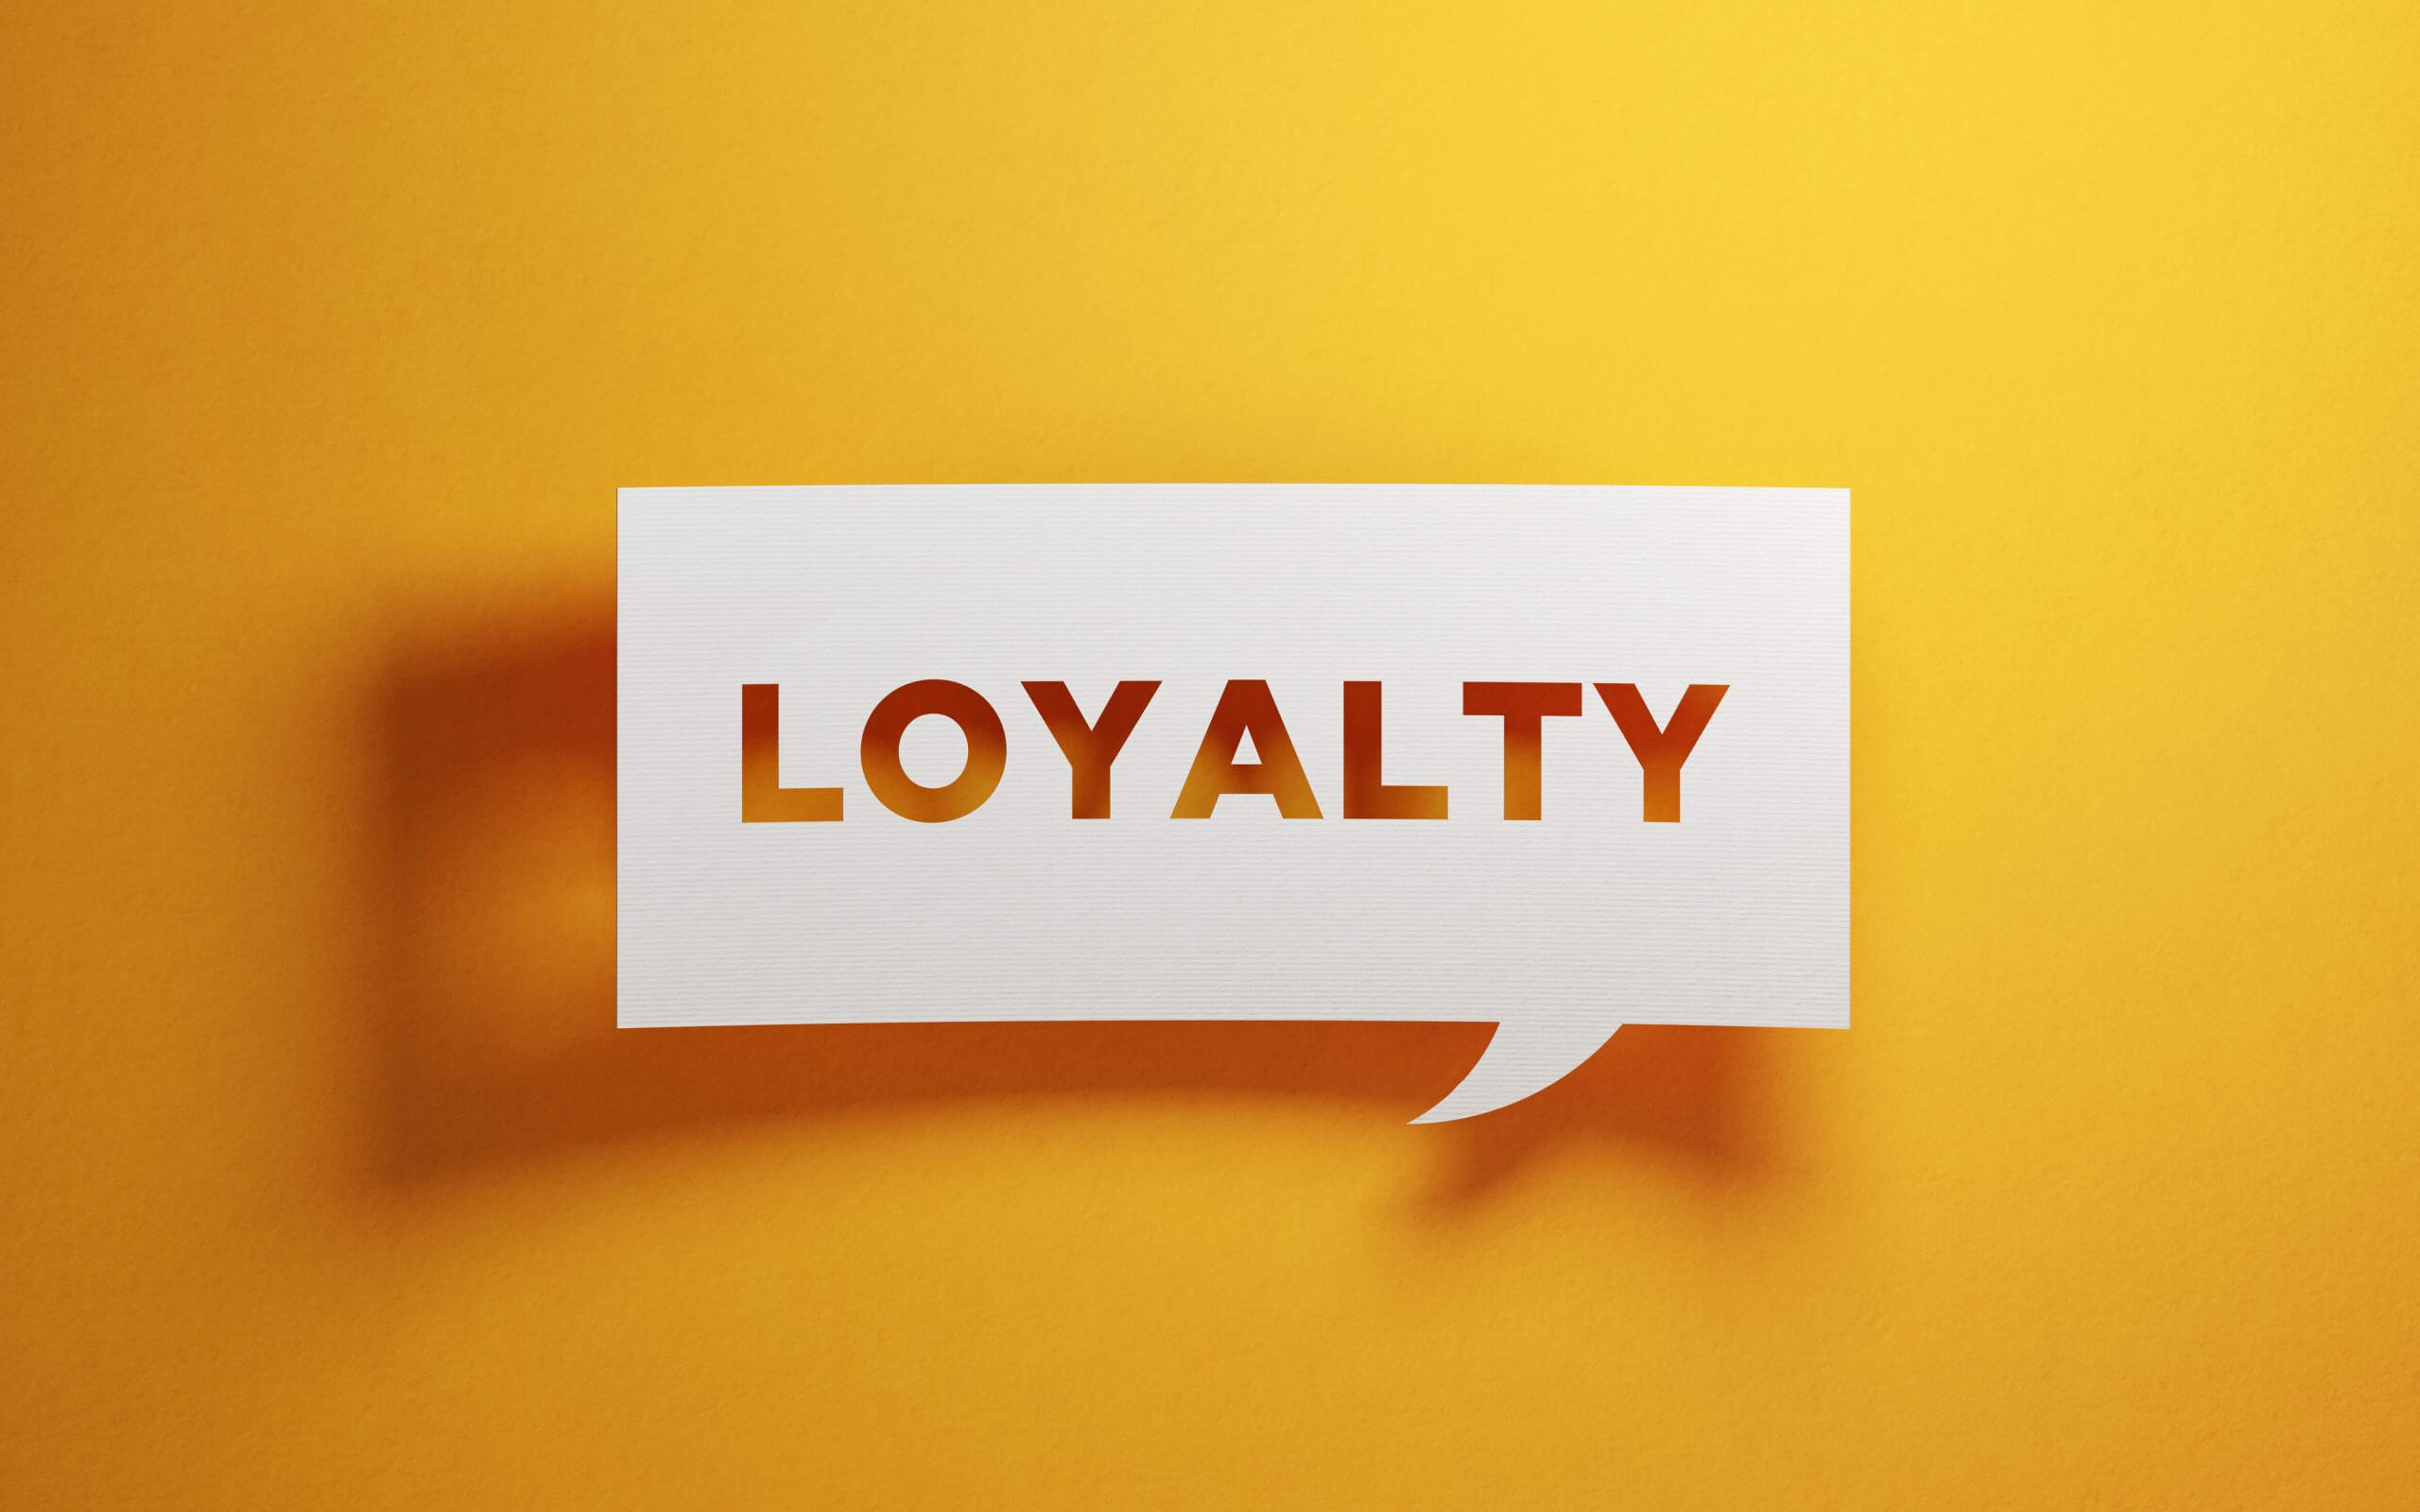 Paper sign on yellow background that says Loyalty